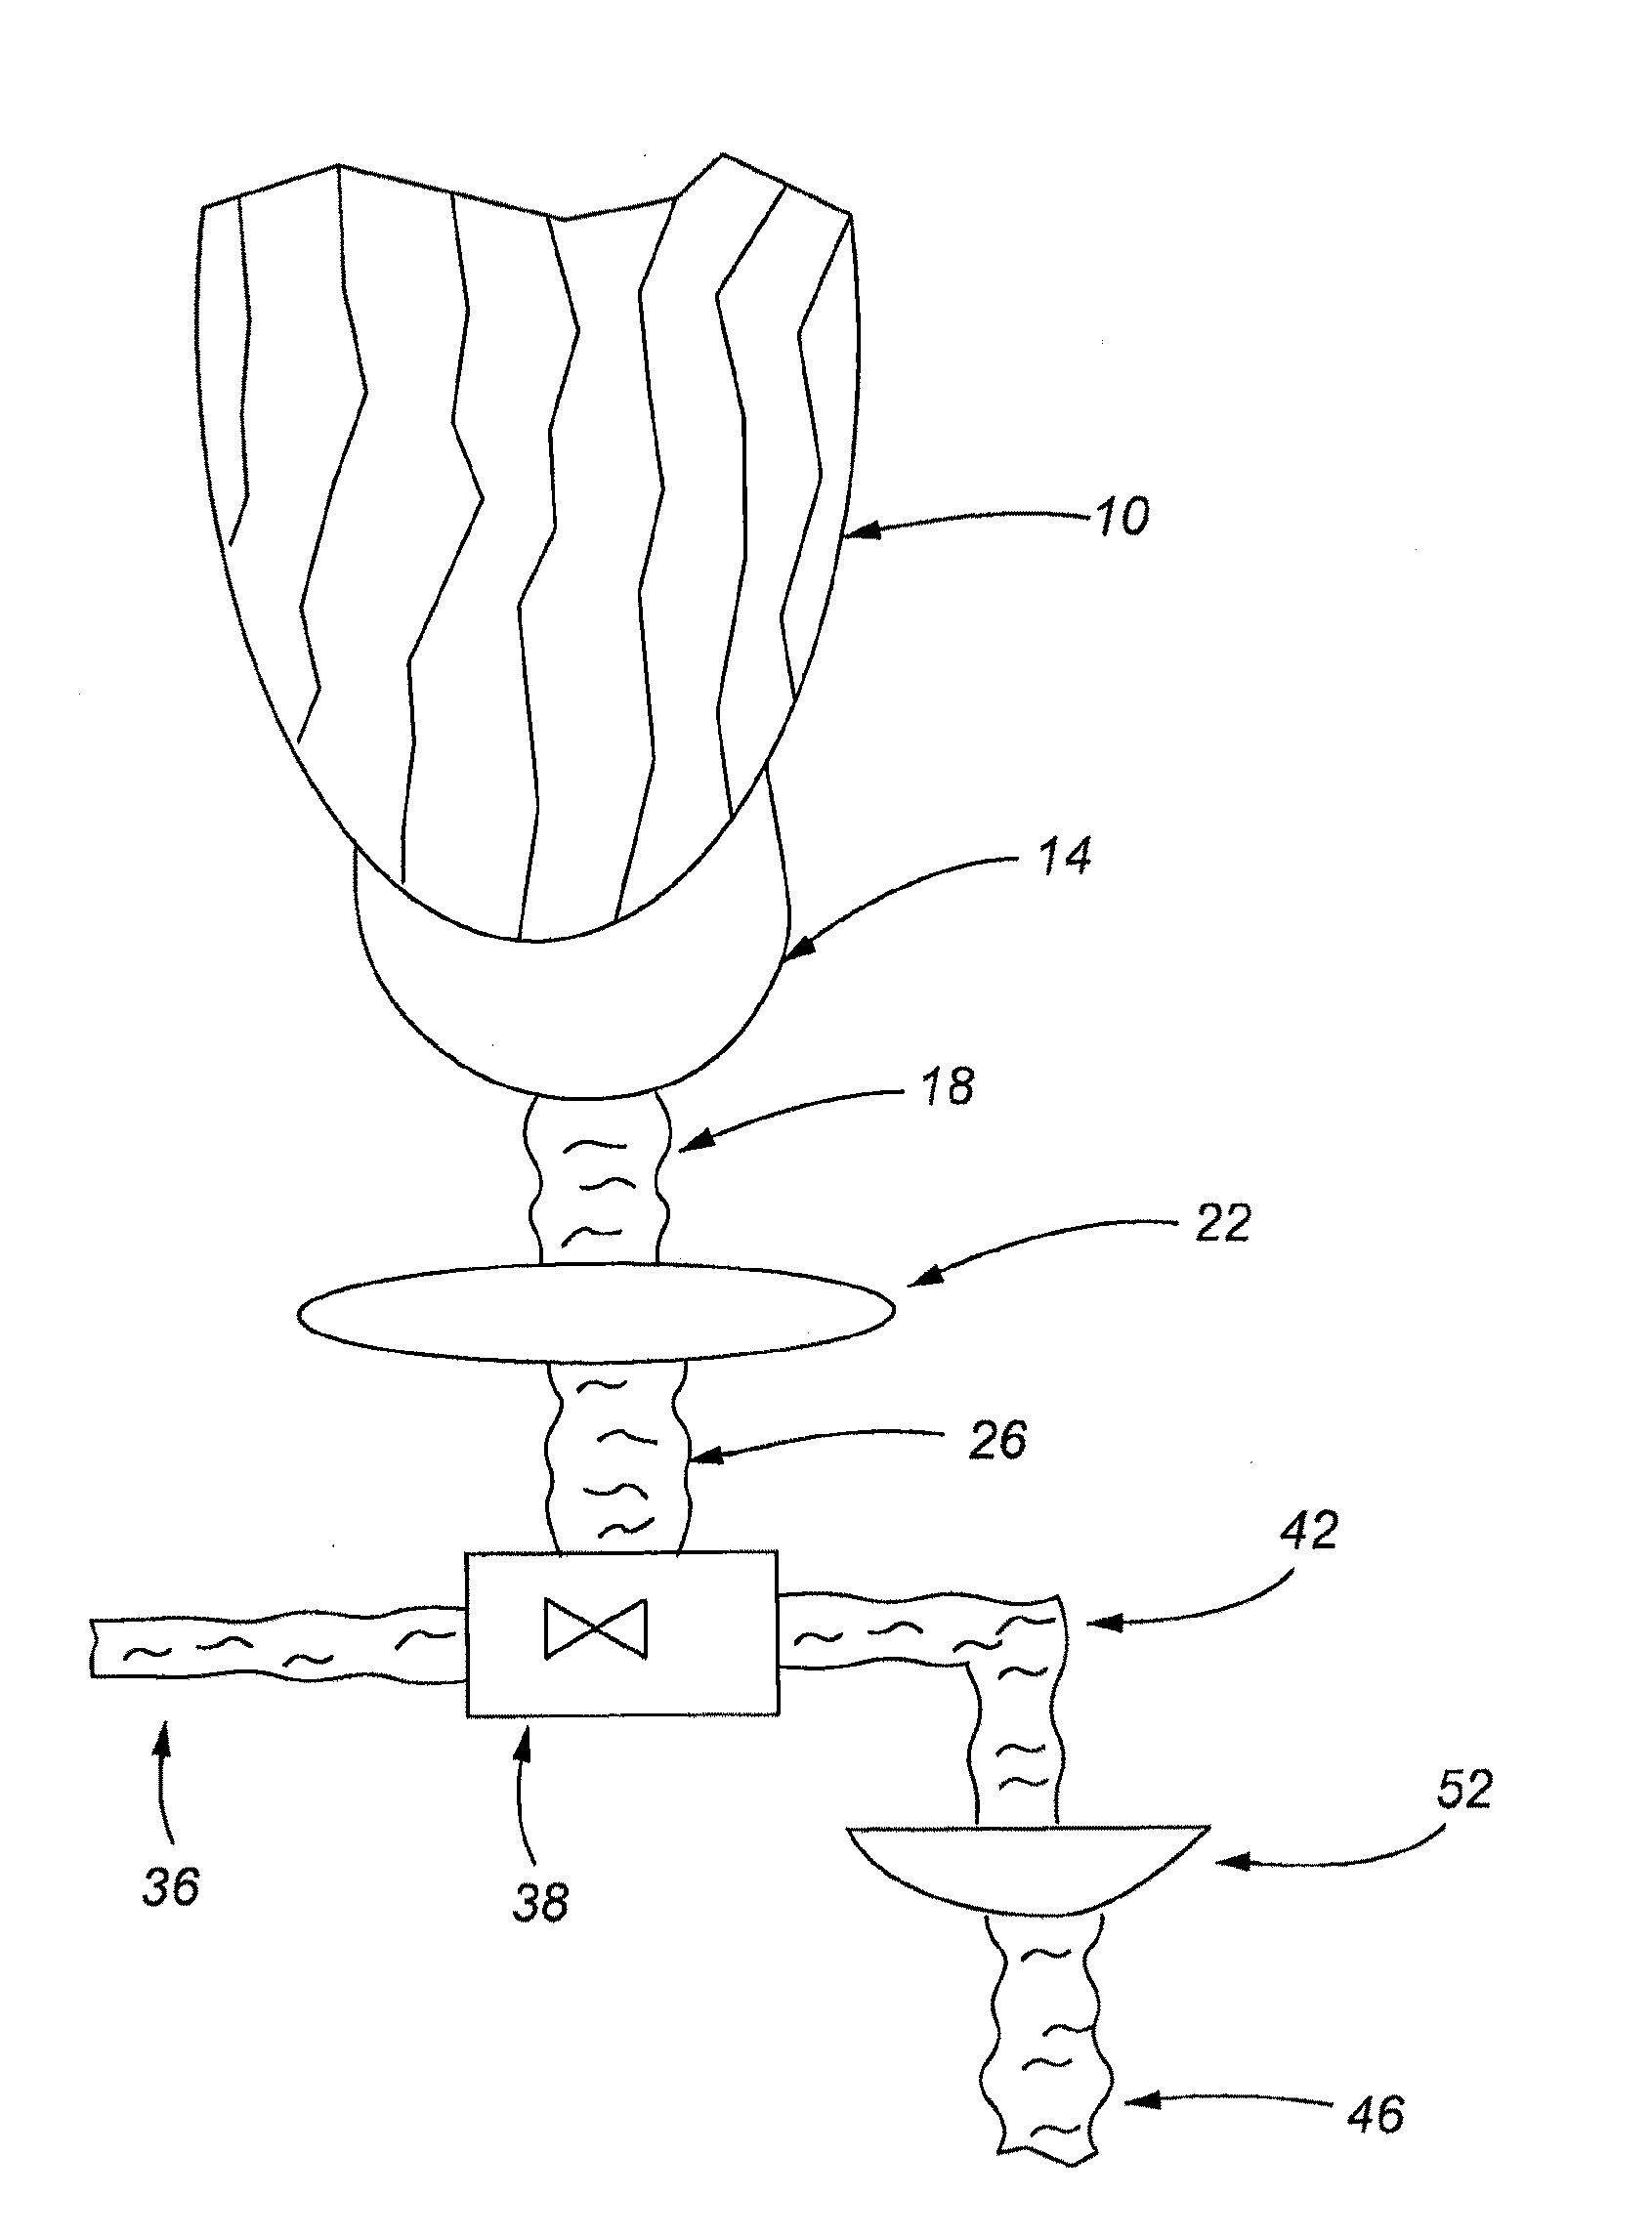 Methods and systems for producing, trading, and transporting water